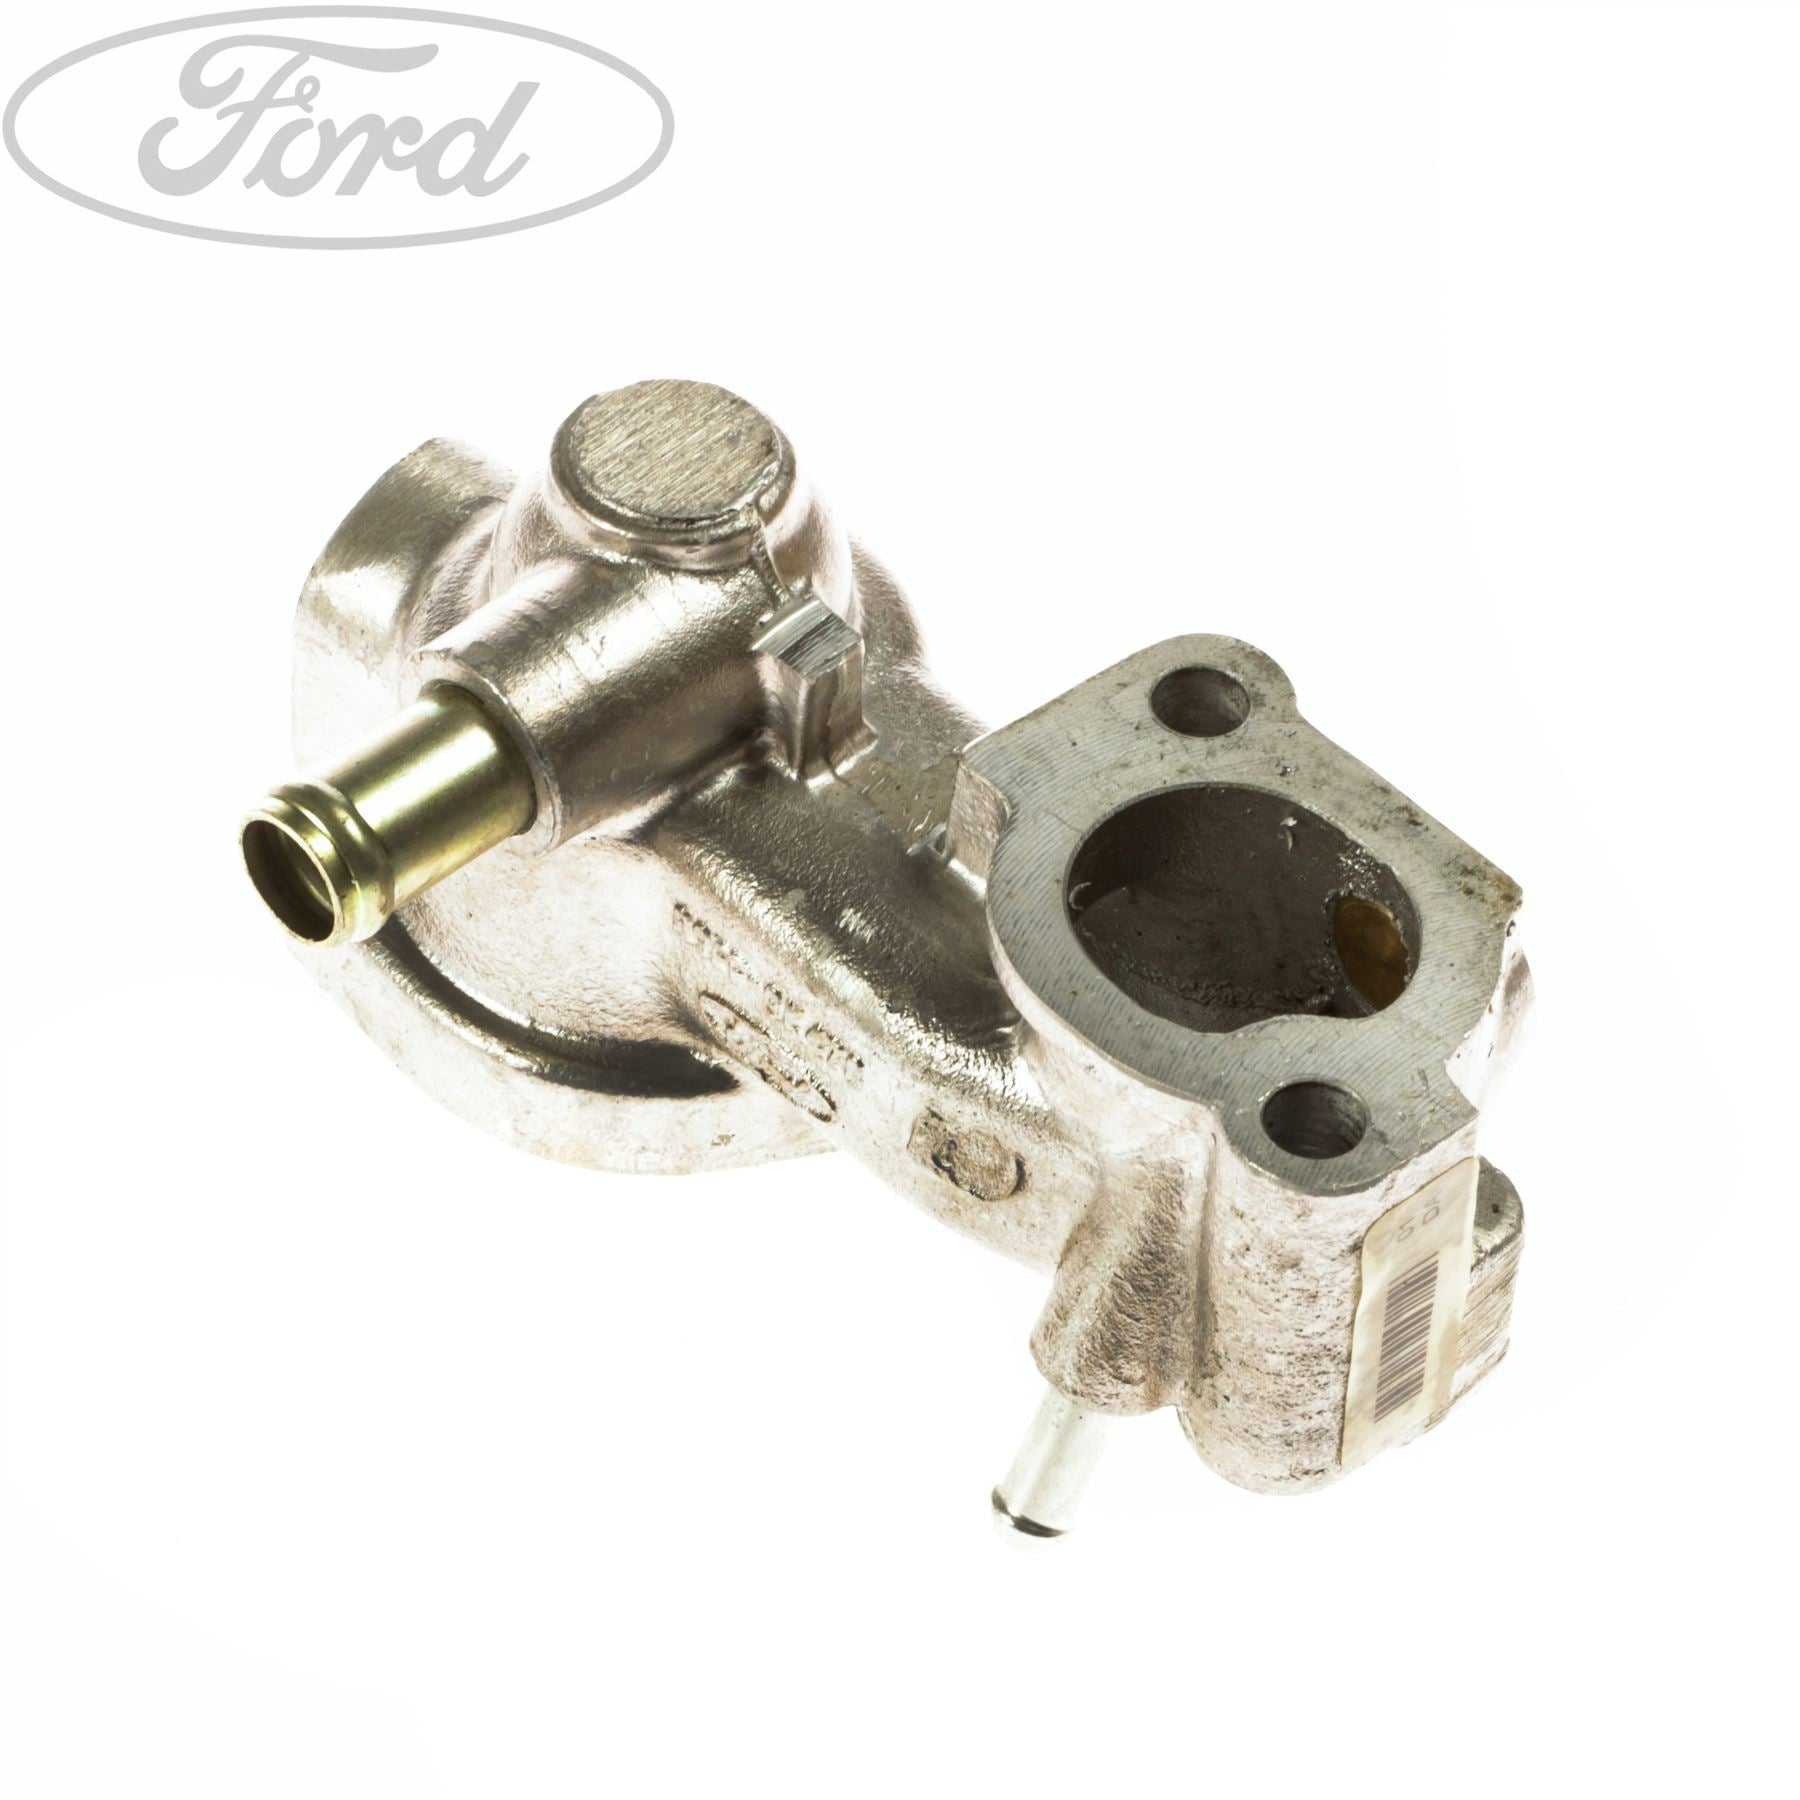 Ford, THERMOSTAT HOUSING